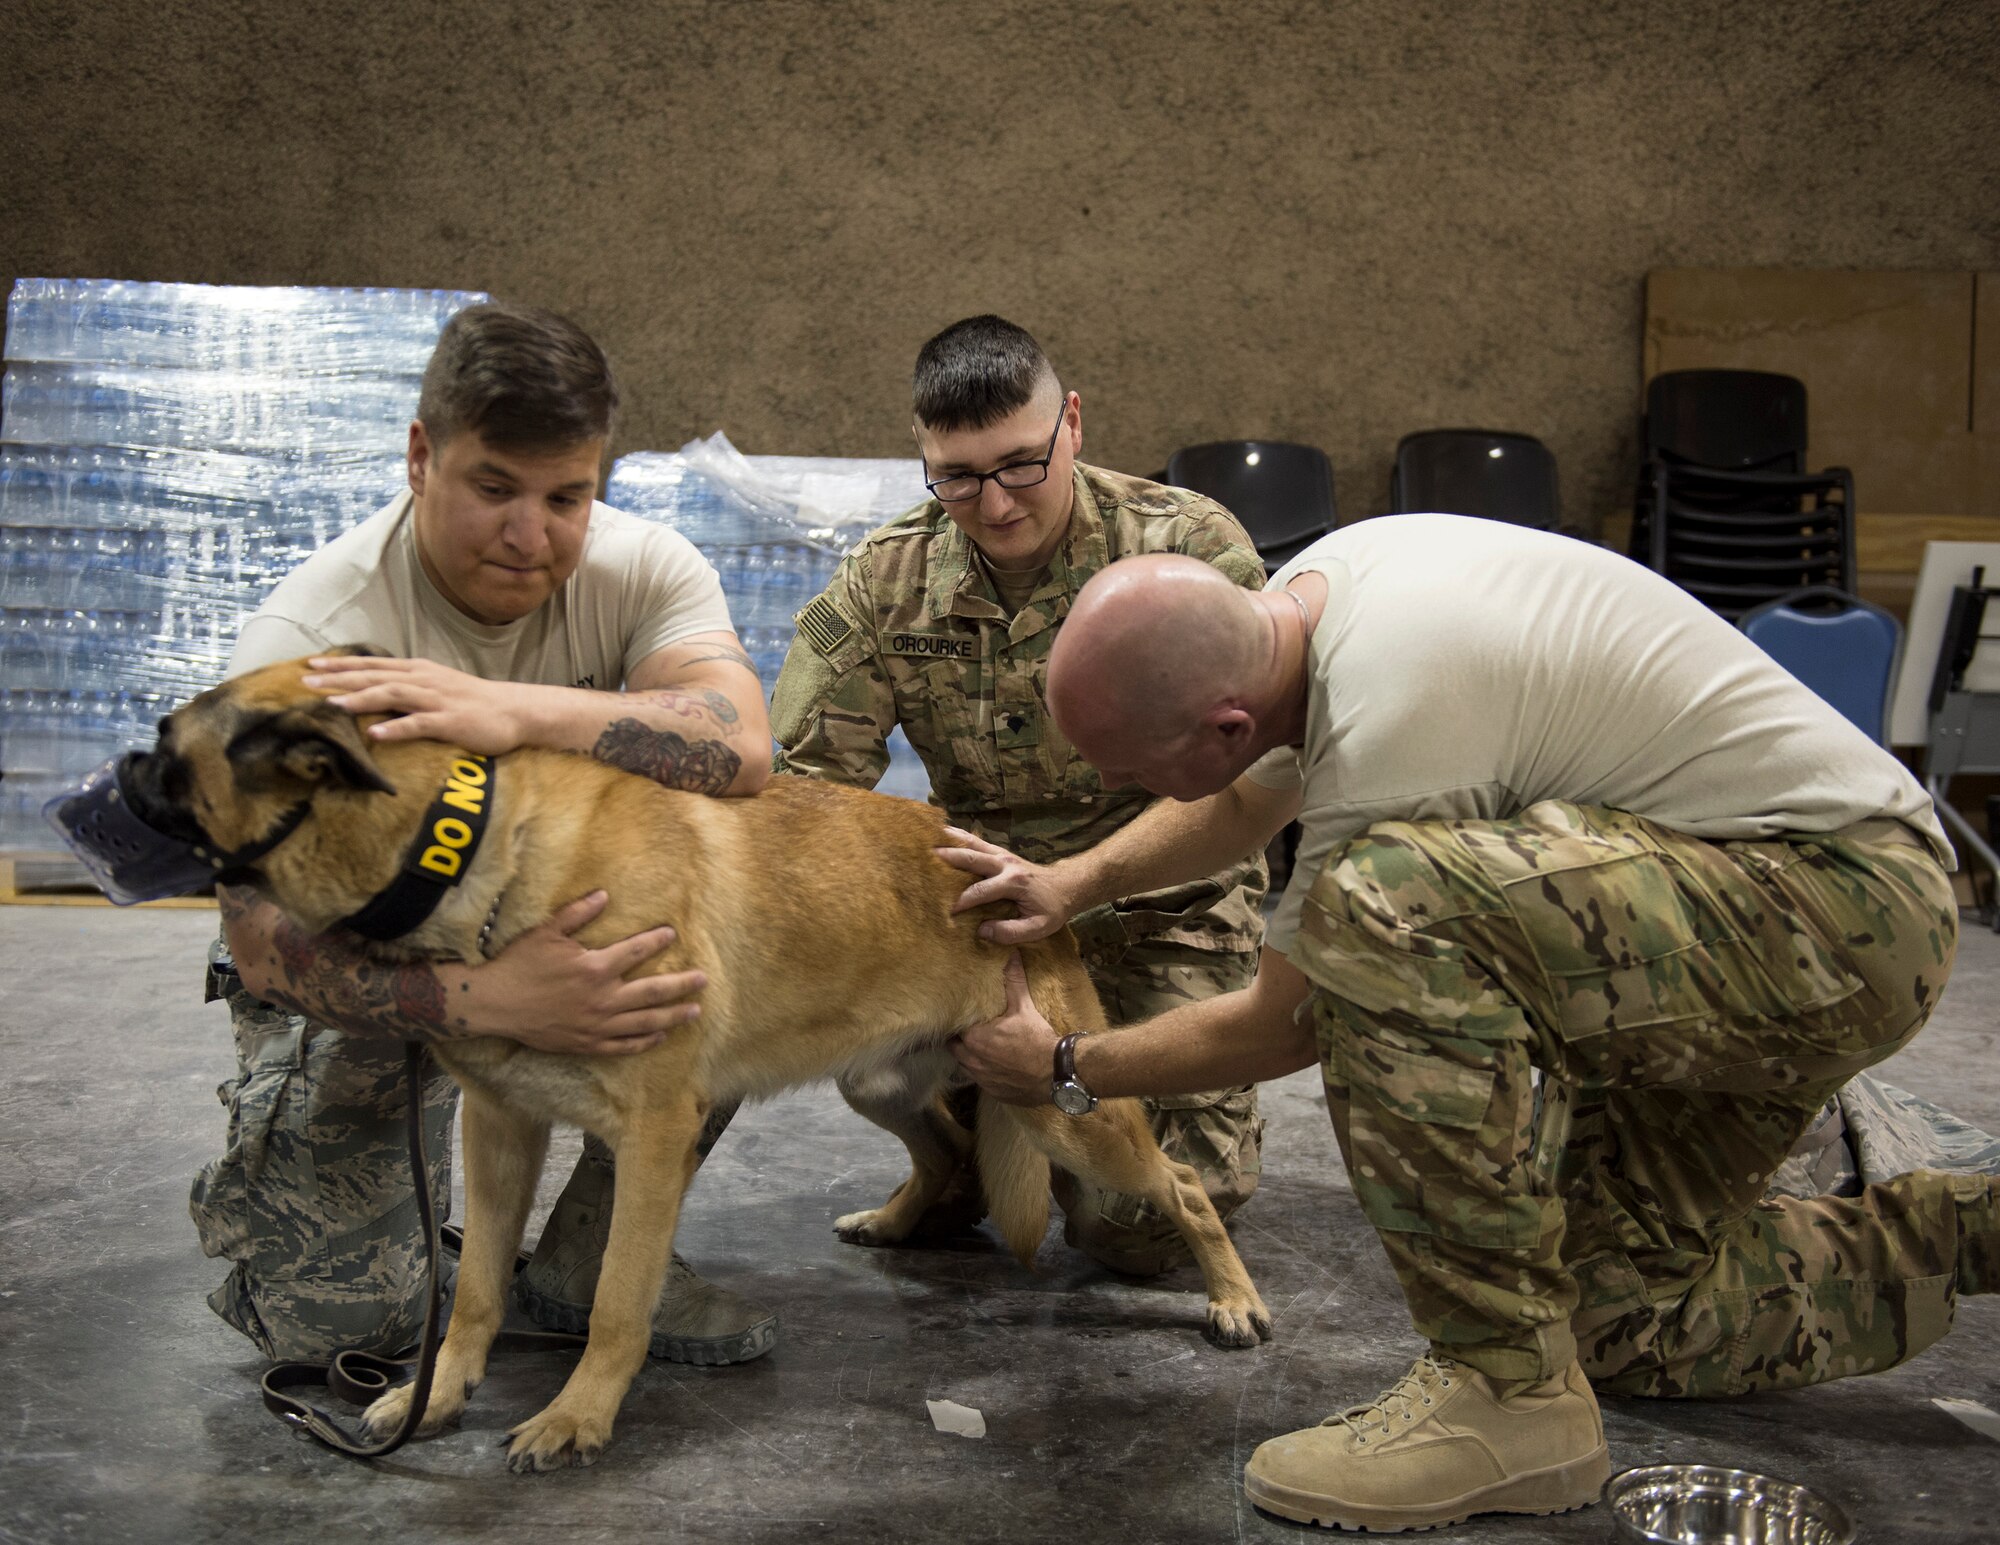 U.S. Air Force Capt. Andrew Bisset, right, 379th Expeditionary Aeromedical Evacuation Squadron, checks the femoral artery on military working dog Ben at Al Udeid Air Base, Qatar, April 19, 2017. Bisset attended the class in order to gain a better understanding of a military working dog anatomy so he can help in the event that no veterinary medical staff is available. (U.S. Air Force photo by Tech. Sgt. Amy M. Lovgren)